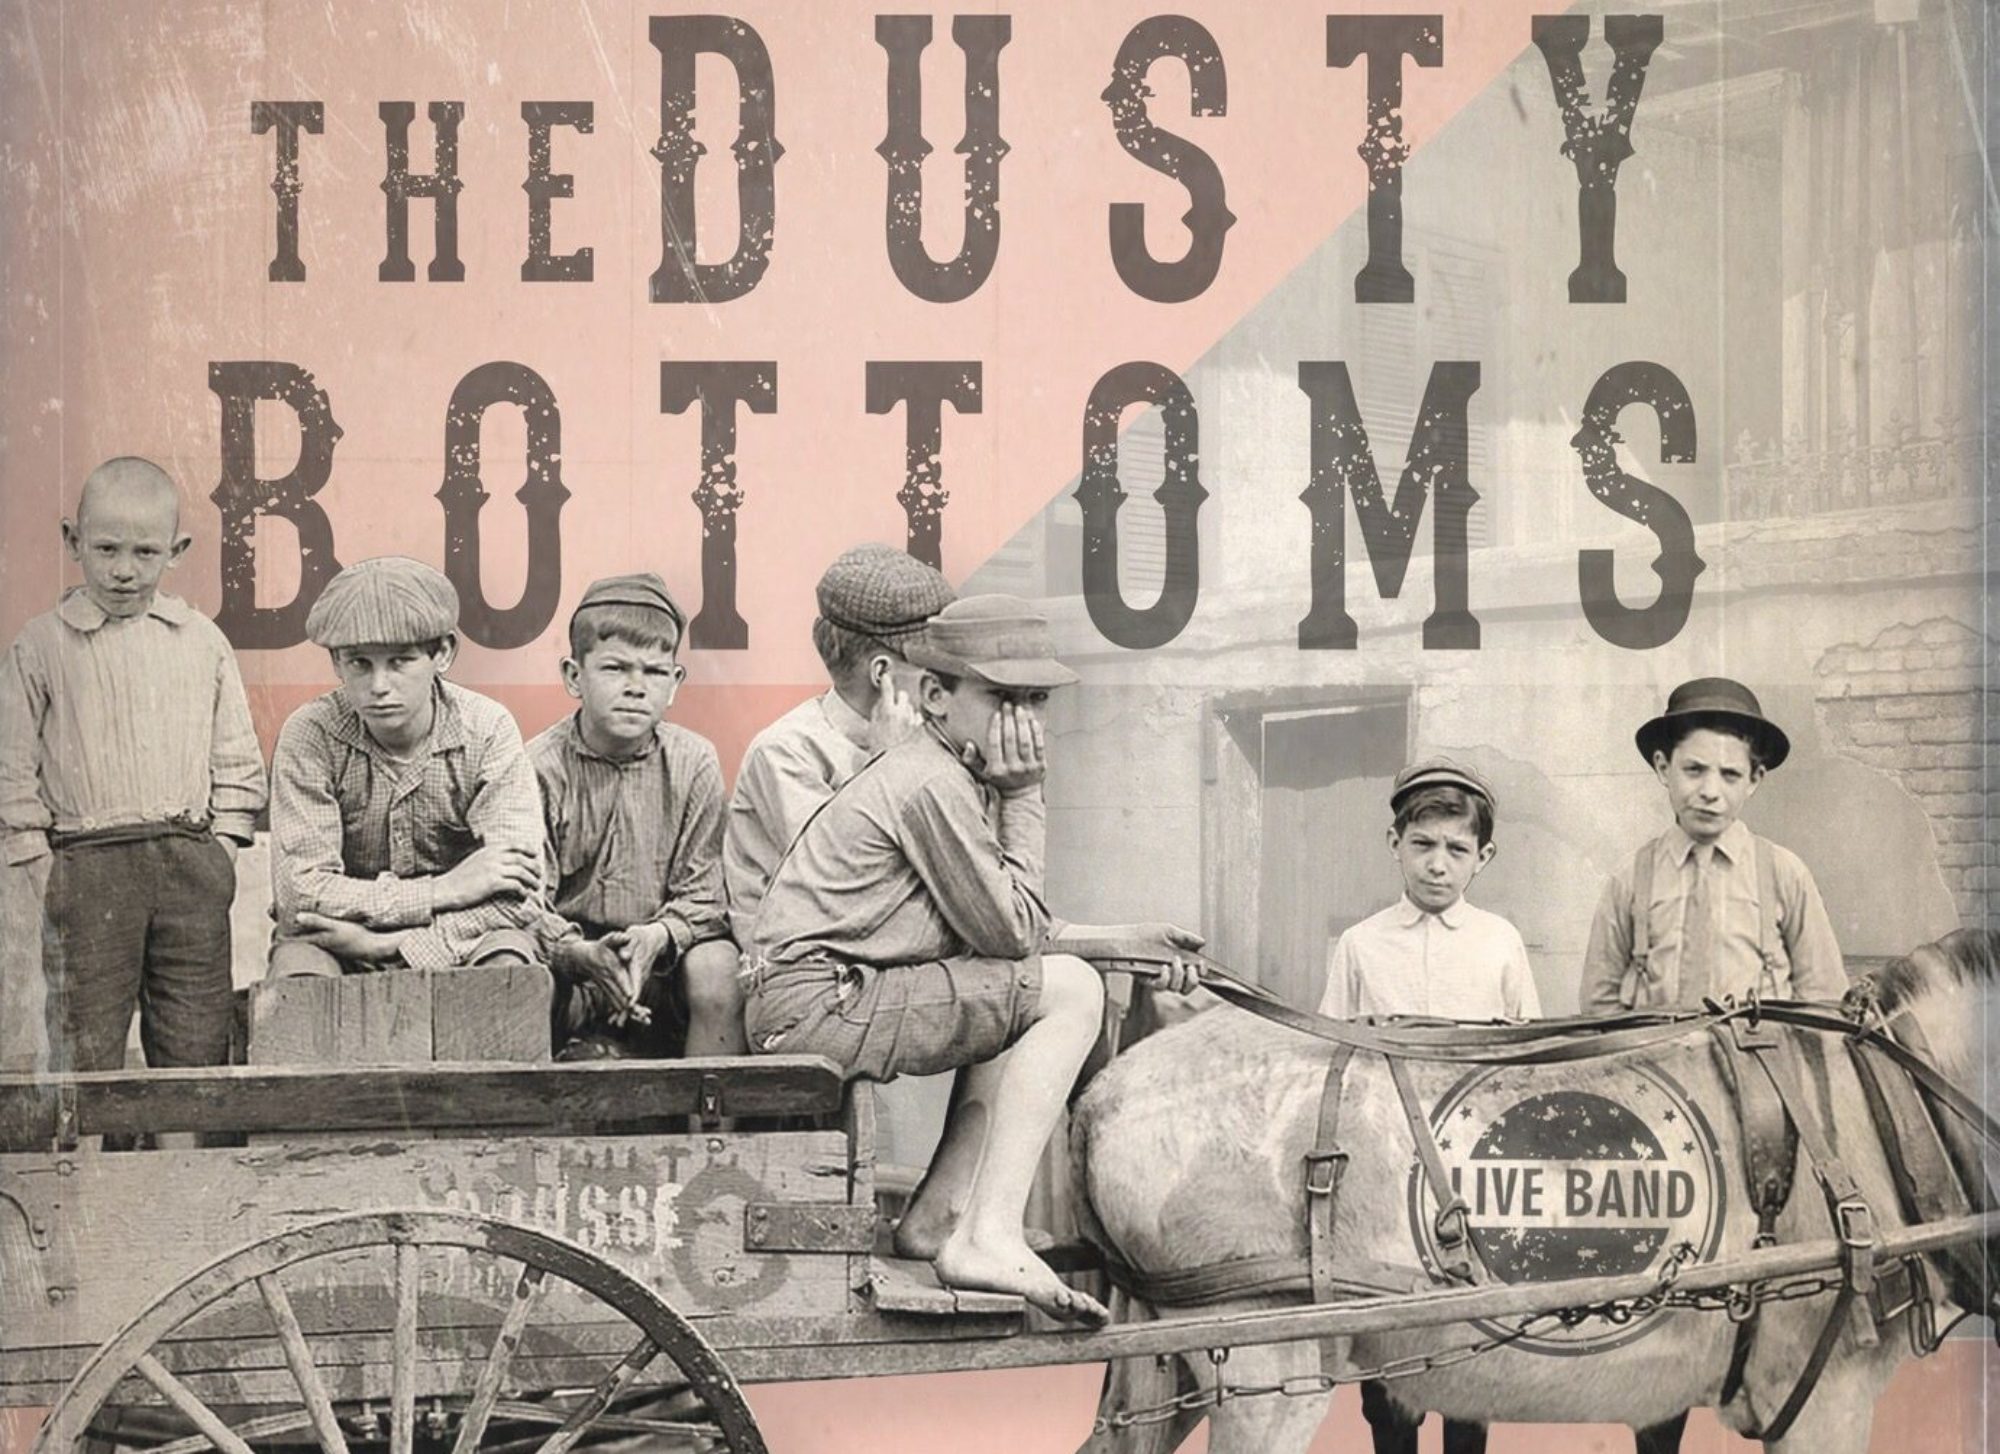 The Dusty Bottoms